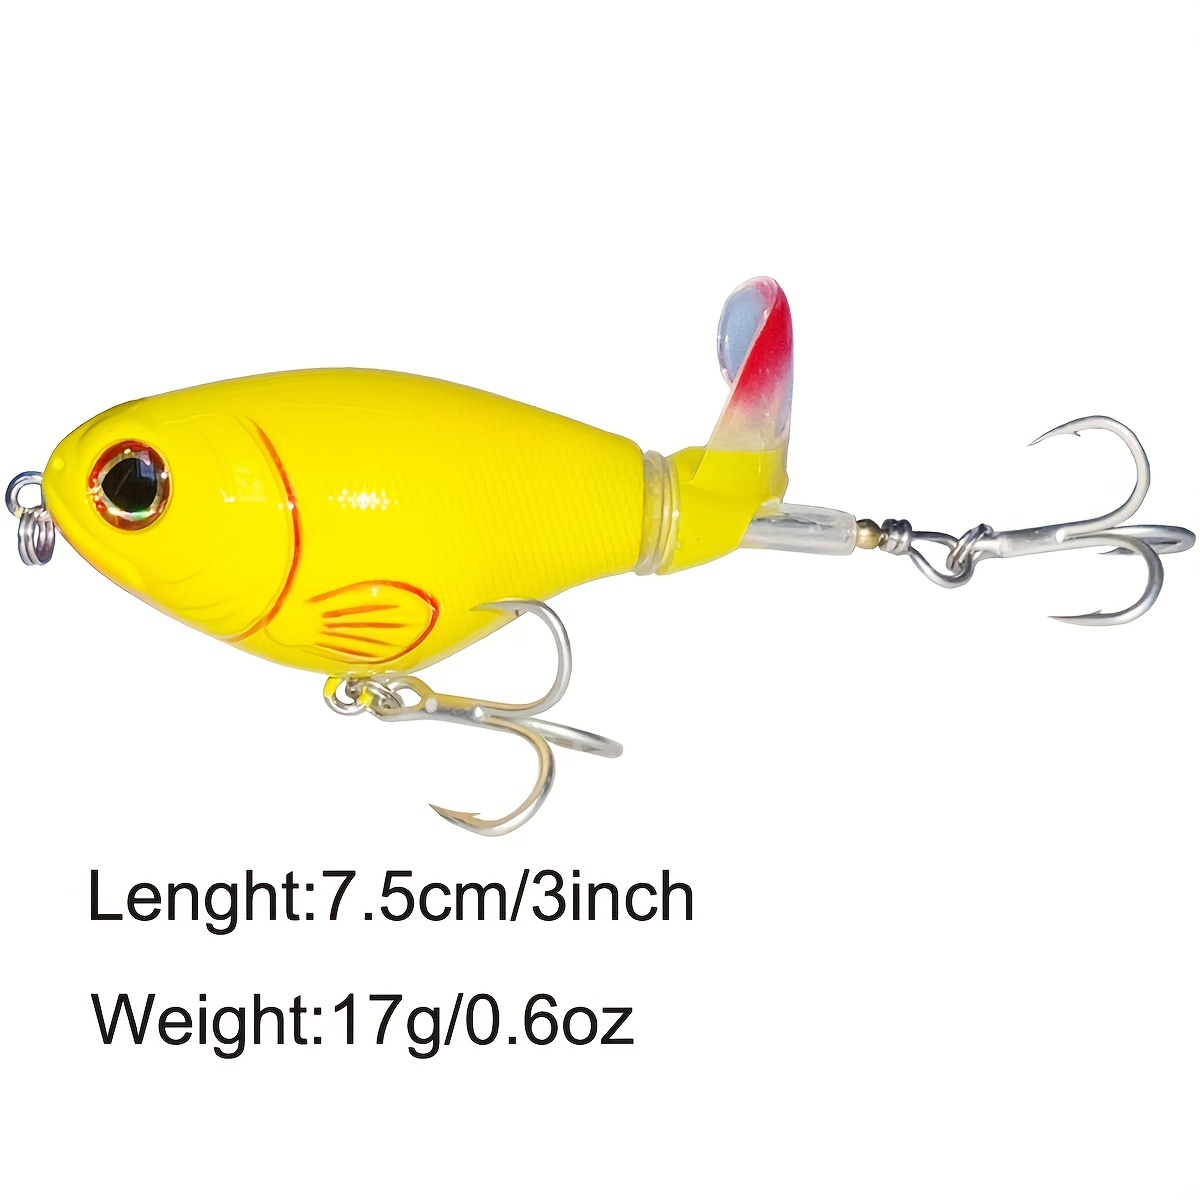 Buy TRUSCEND Topwater Fishing Lures with BKK Hooks, Pencil Plopper Fishing  Lure for Bass Catfish Pike Perch, Floating Minnow Bass Bait with Propeller  Tail, Top Water Pencil Lures Freshwater or Saltwater Online